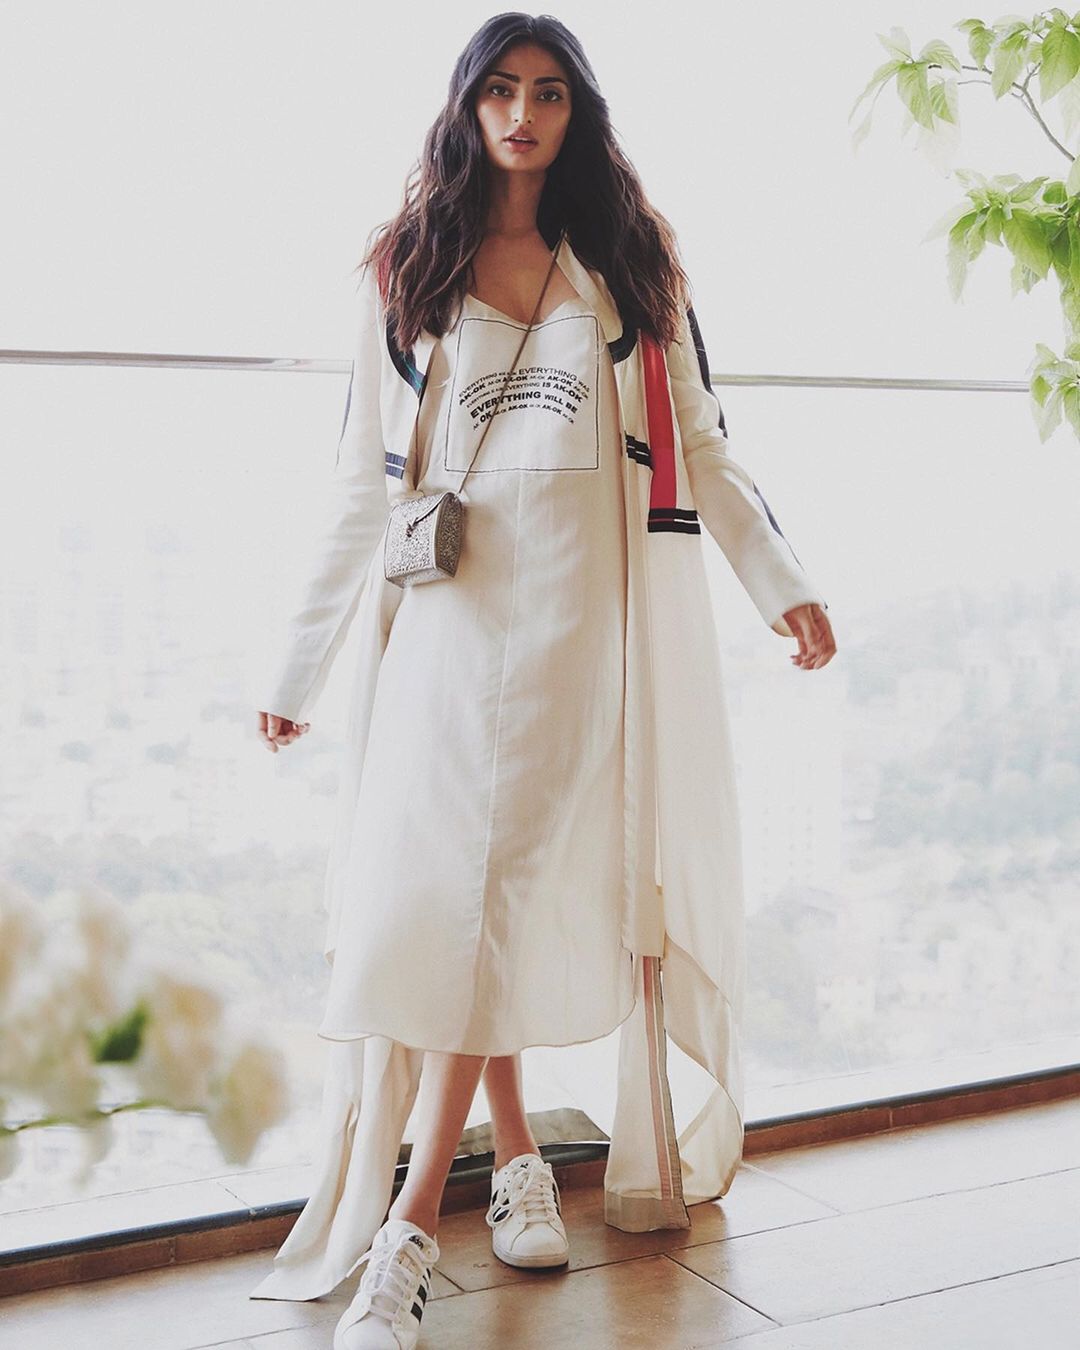 The White Tunic Outfit Look Of Athiya Shetty